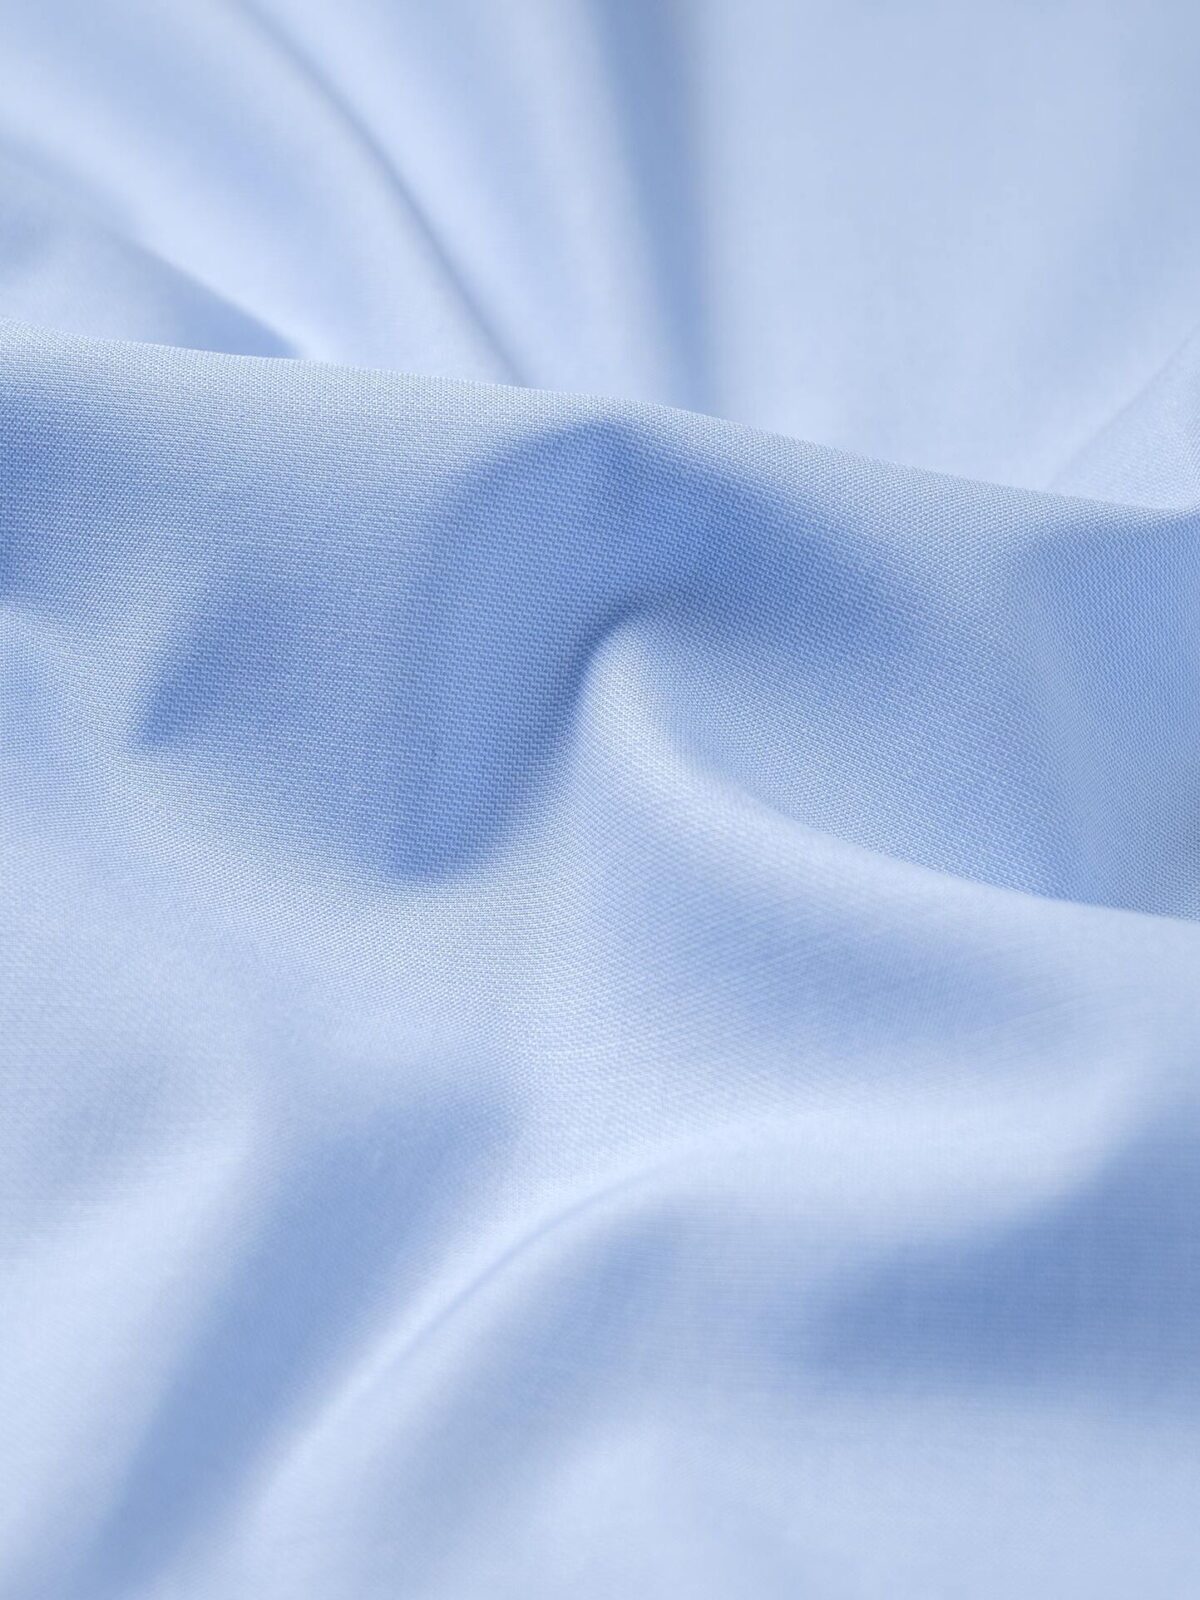 Regent Light Blue 120s End on End Twill Shirts by Proper Cloth